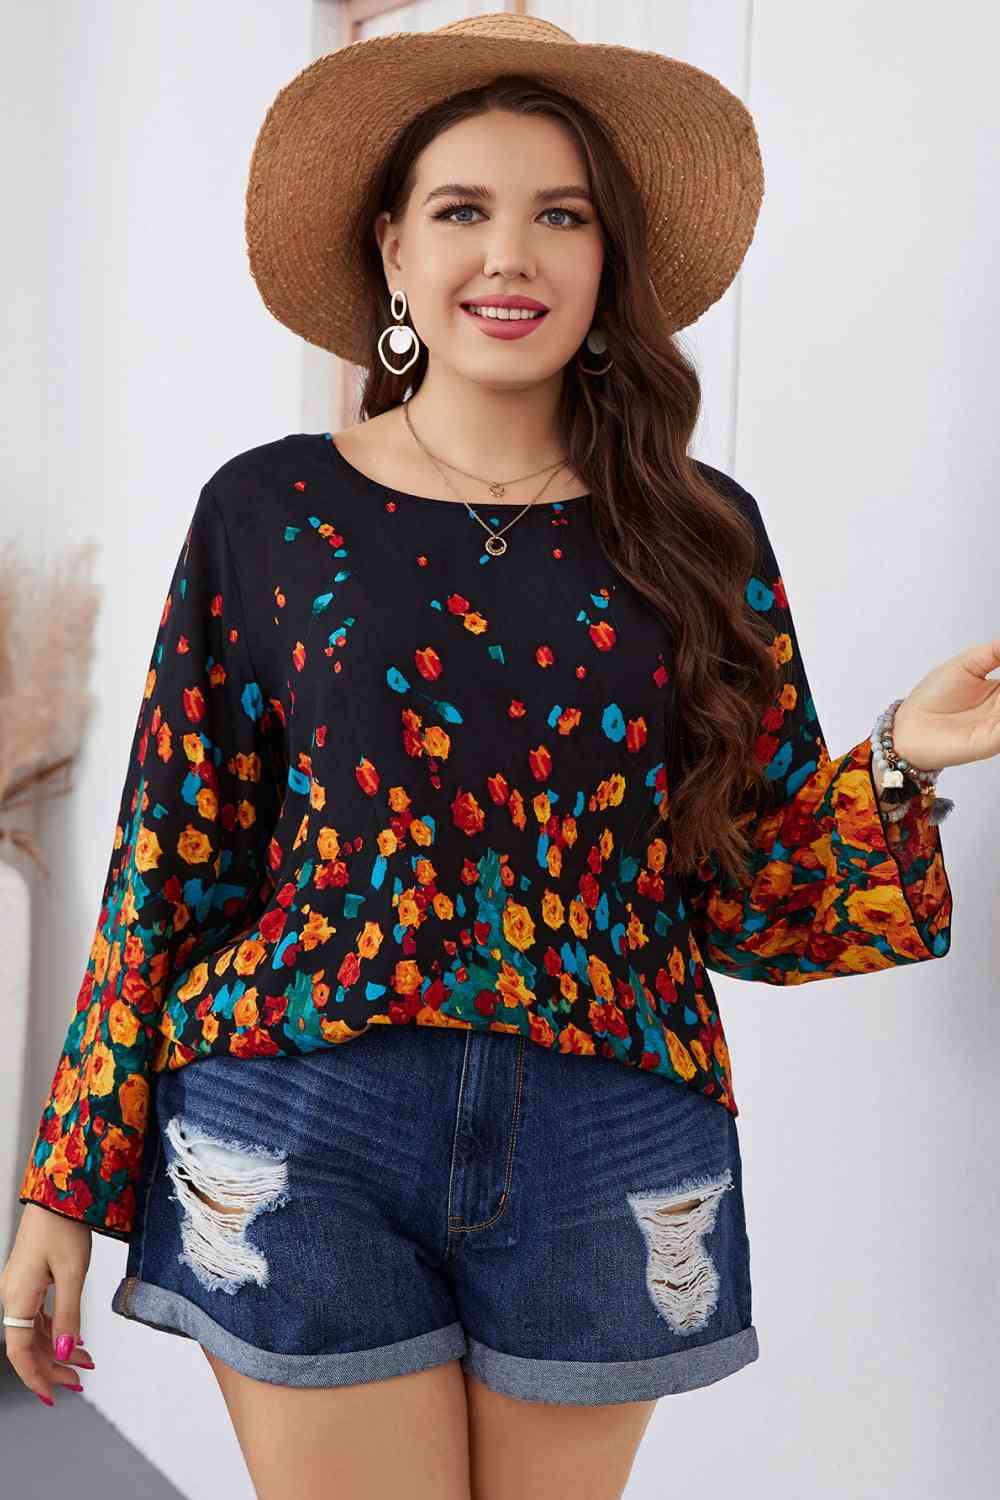 Melo Apparel Plus Size Floral Round Neck Long Sleeve Blouse - Just Enuff Sexy